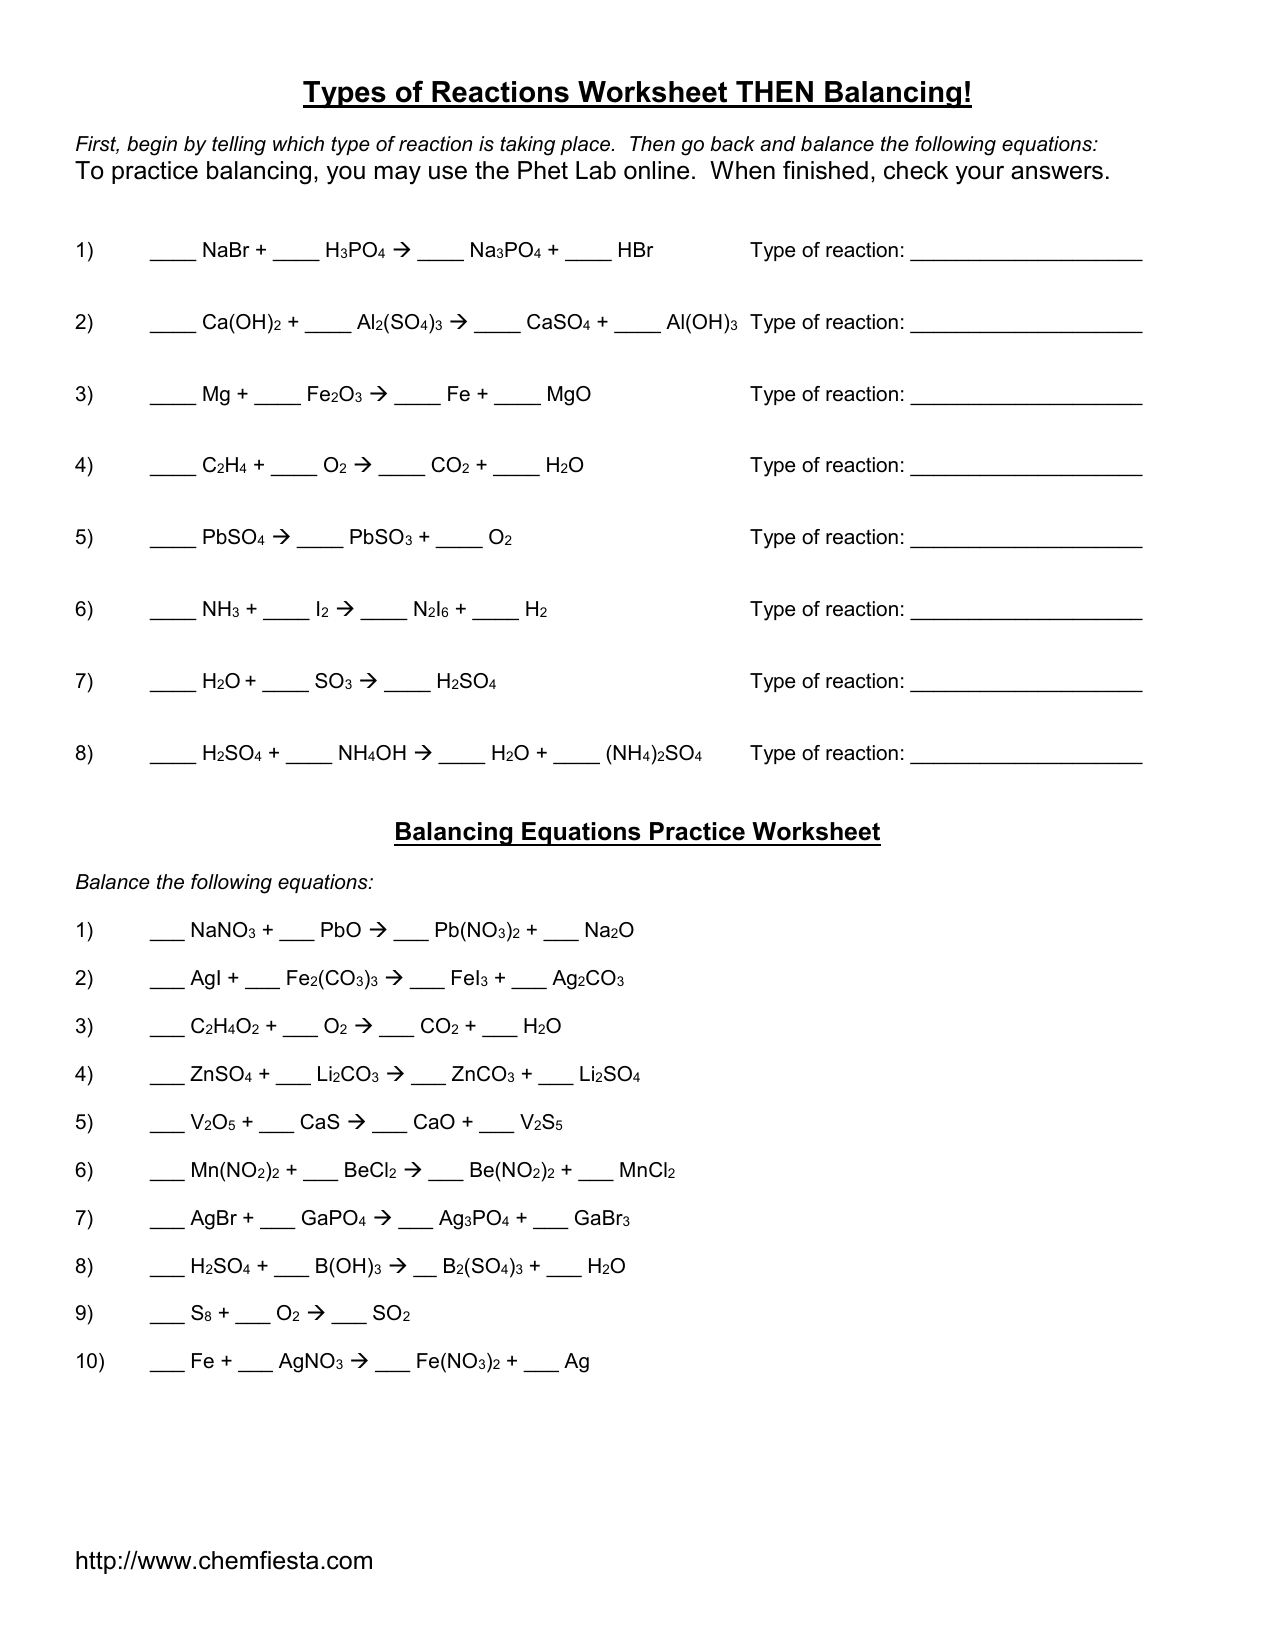 Balancing Equations Practice Worksheet - Chemistry Throughout Chemical Reactions Types Worksheet